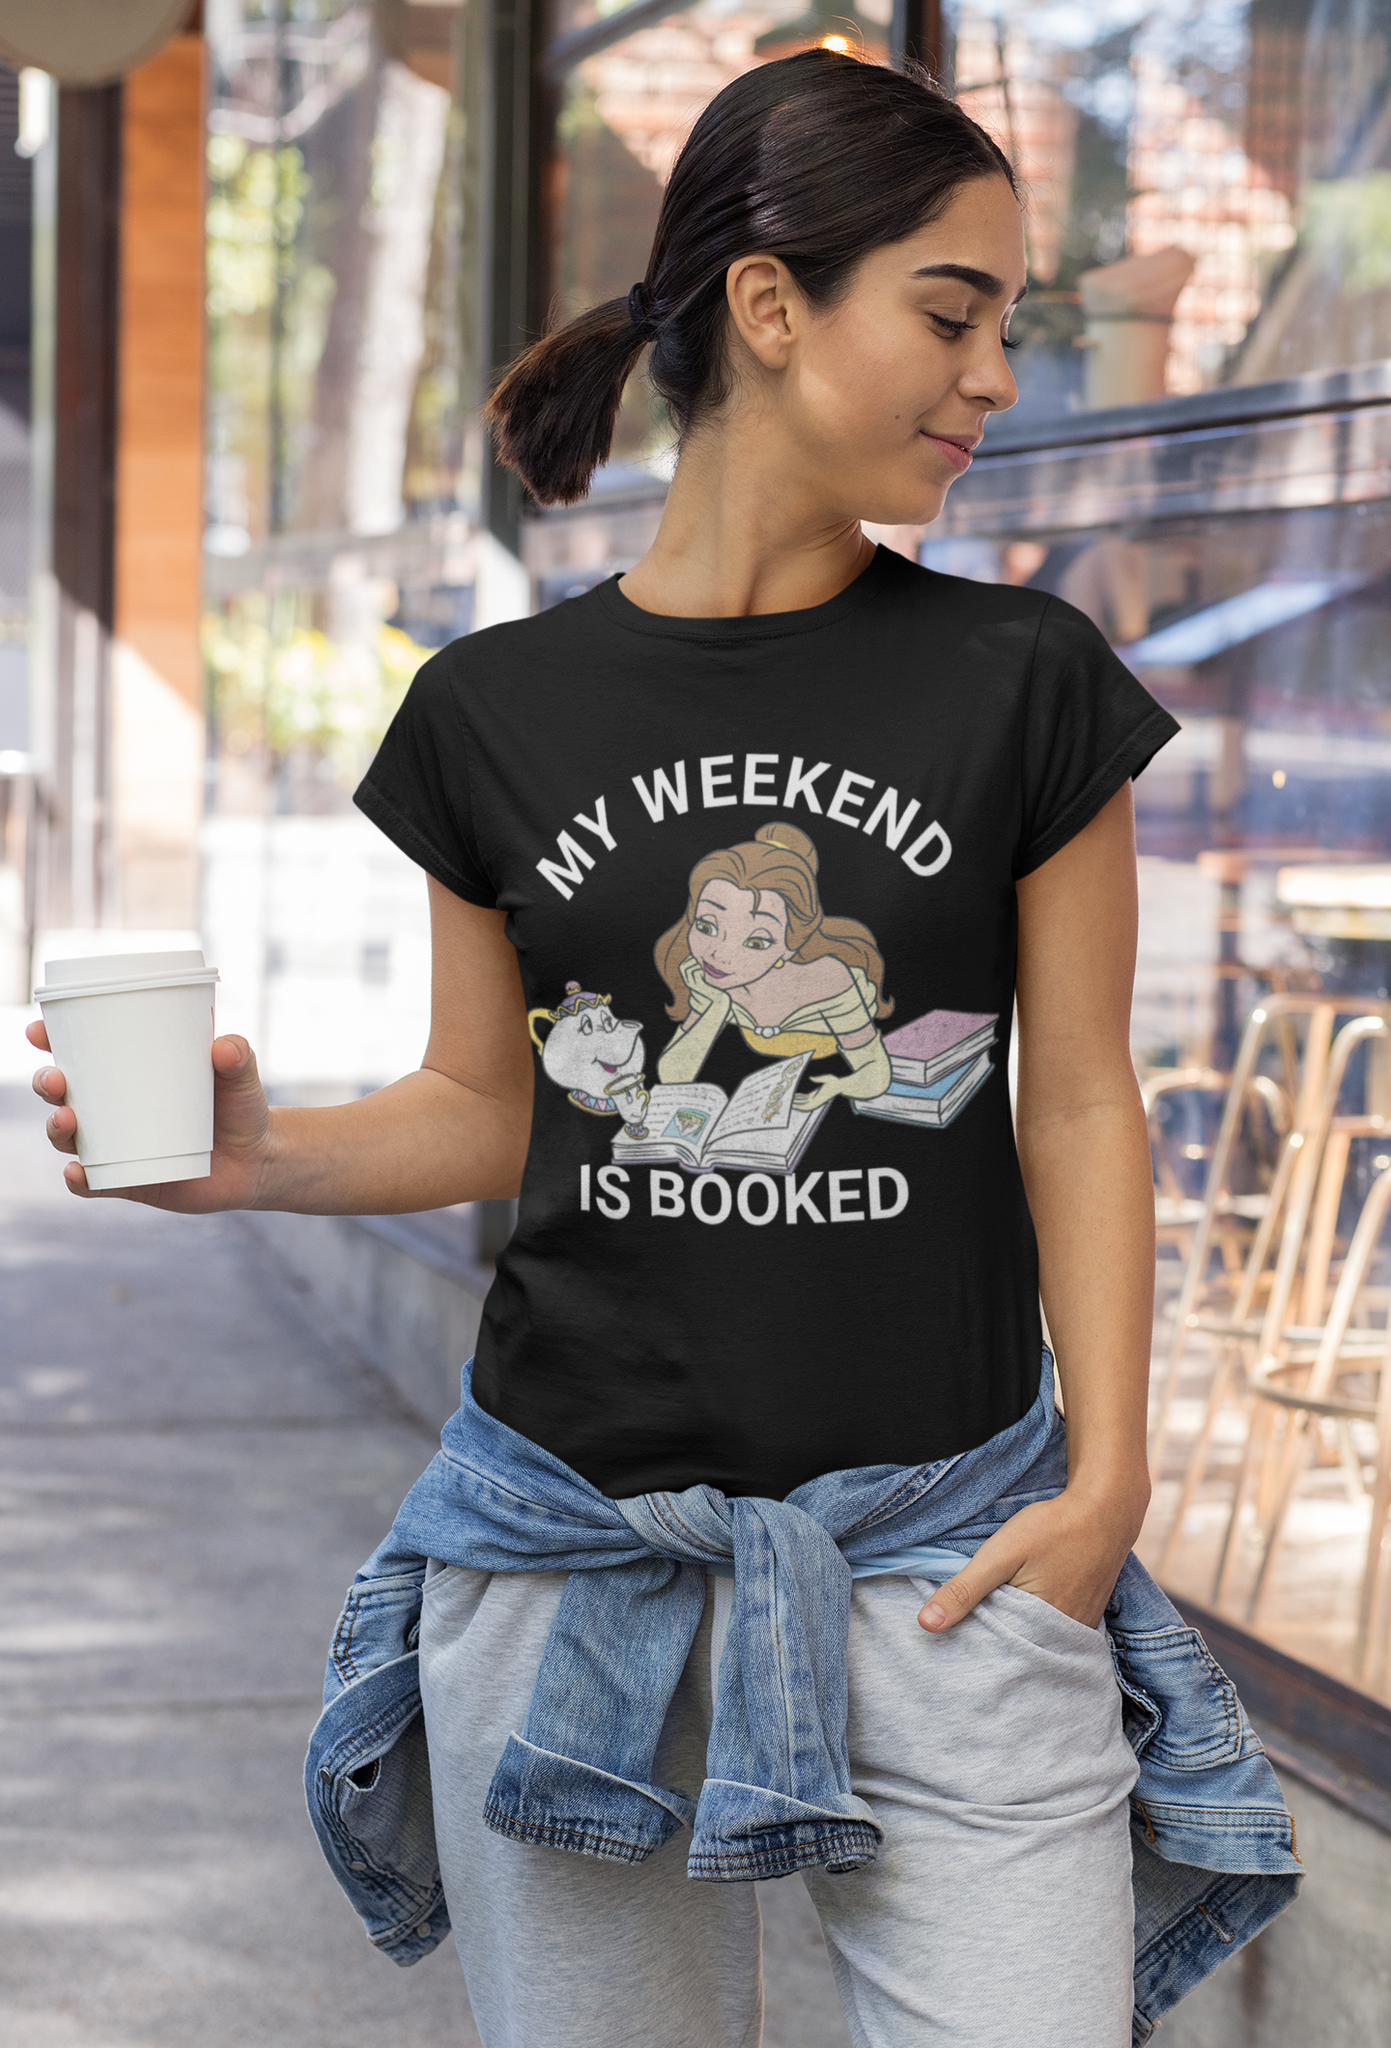 Disney Beauty And The Beast T Shirt, Belle Mrs Potts and Chip T Shirt, My Weekend Is Booked Tshirt